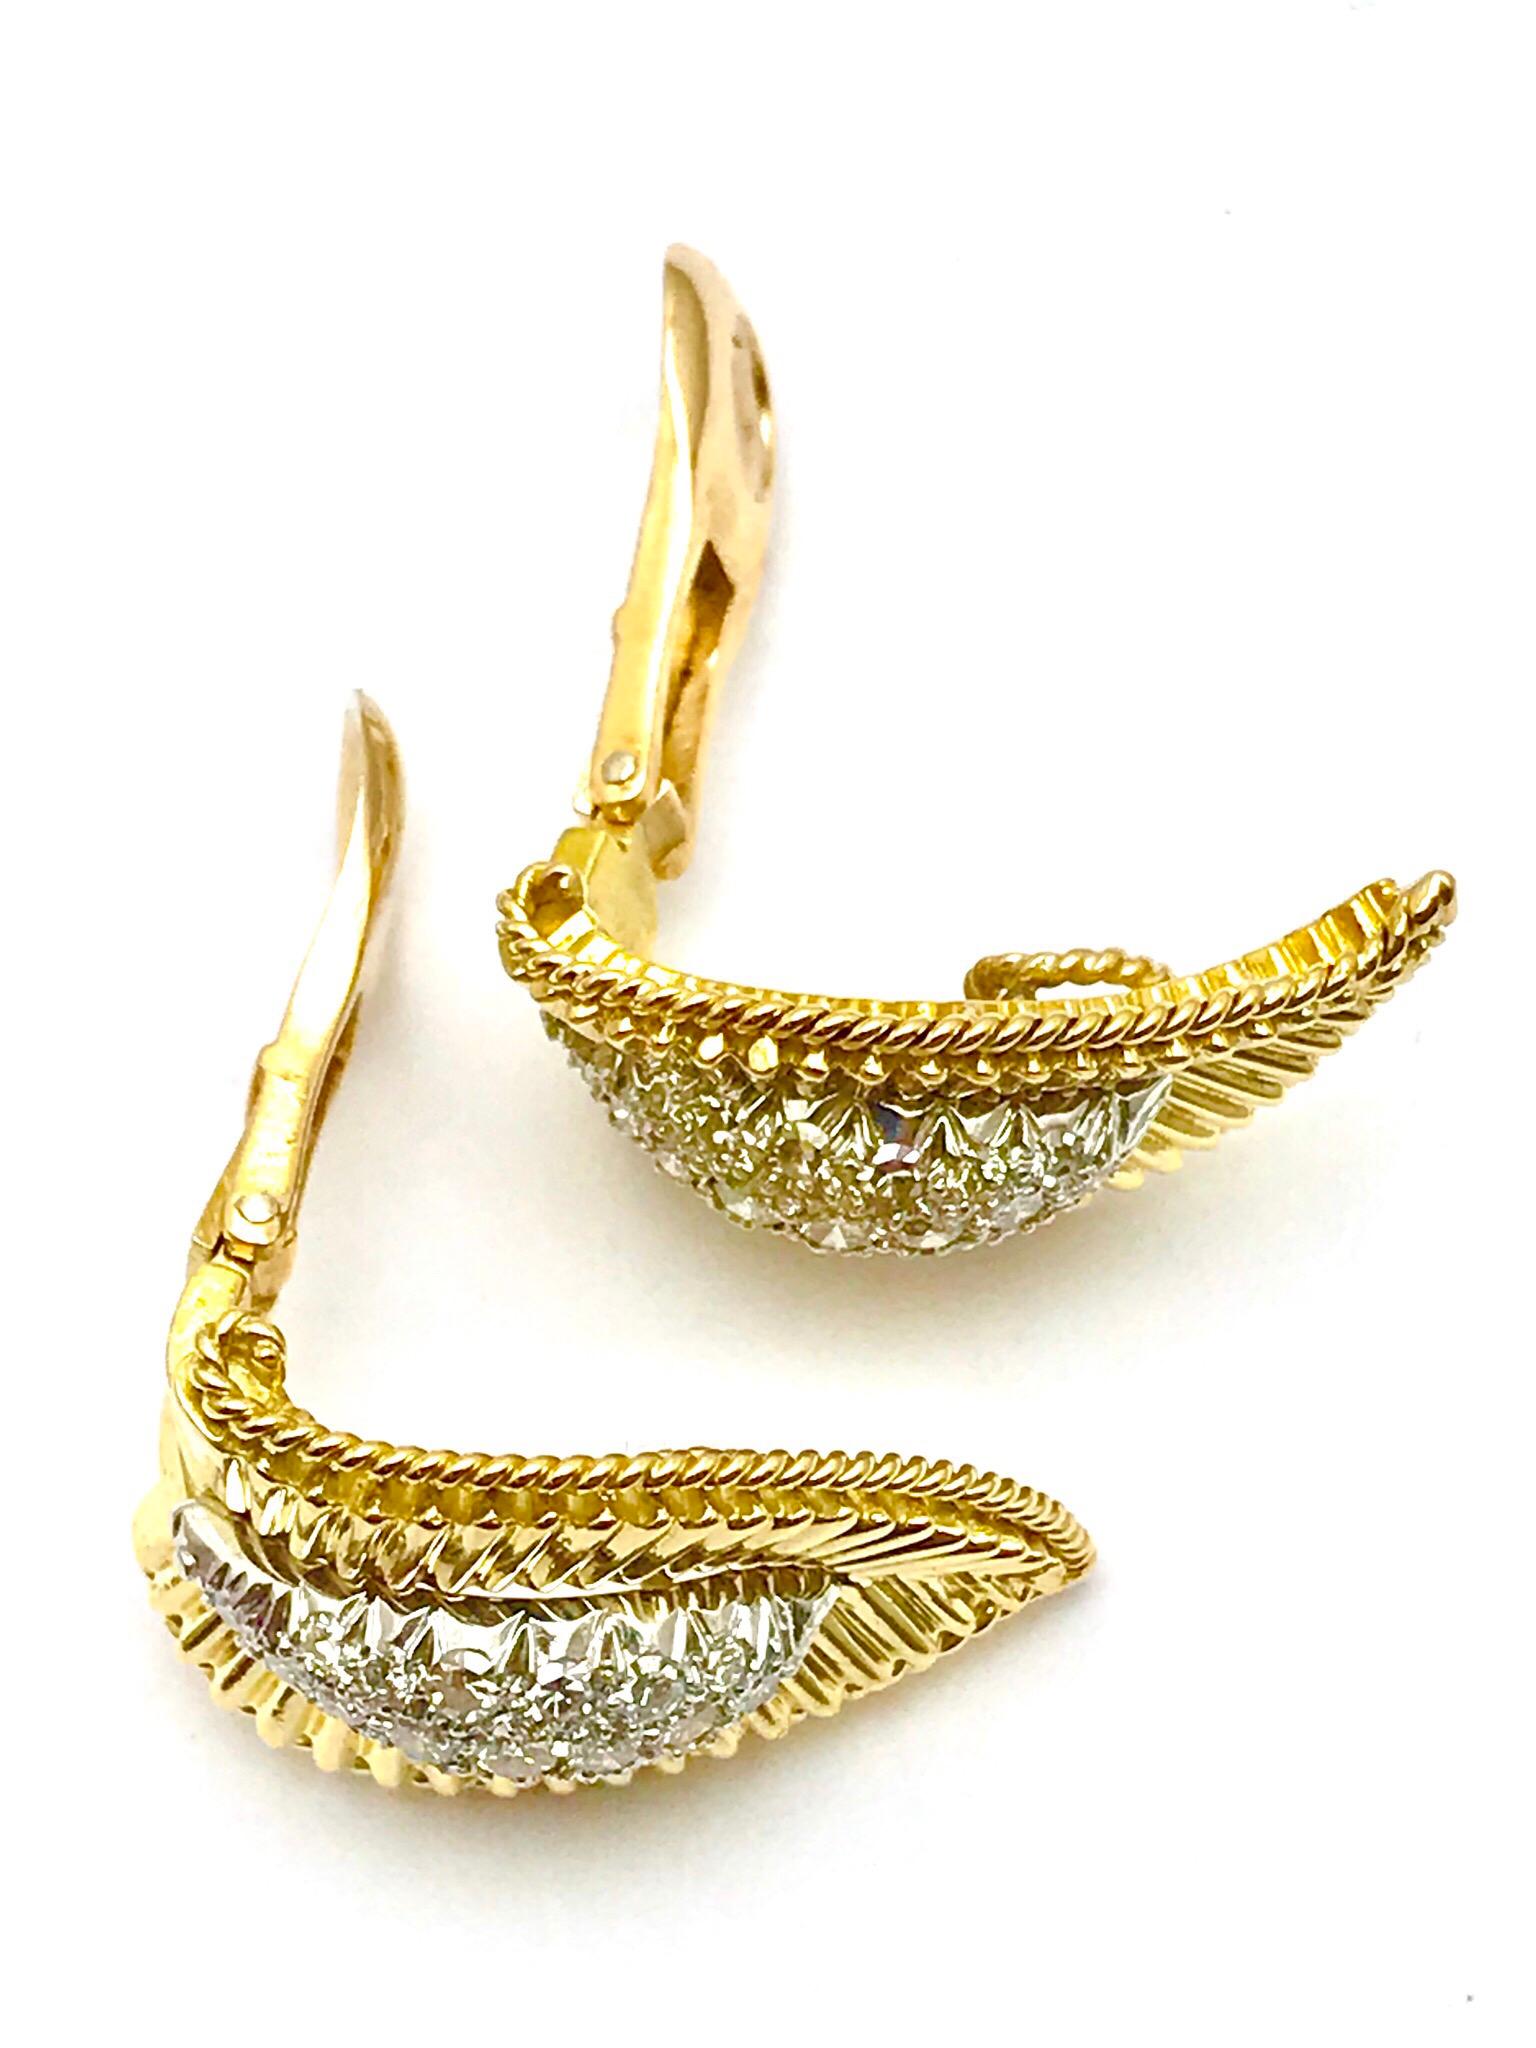 Pave Diamond and Yellow Gold Leaf Clip Earrings In Excellent Condition For Sale In Chevy Chase, MD